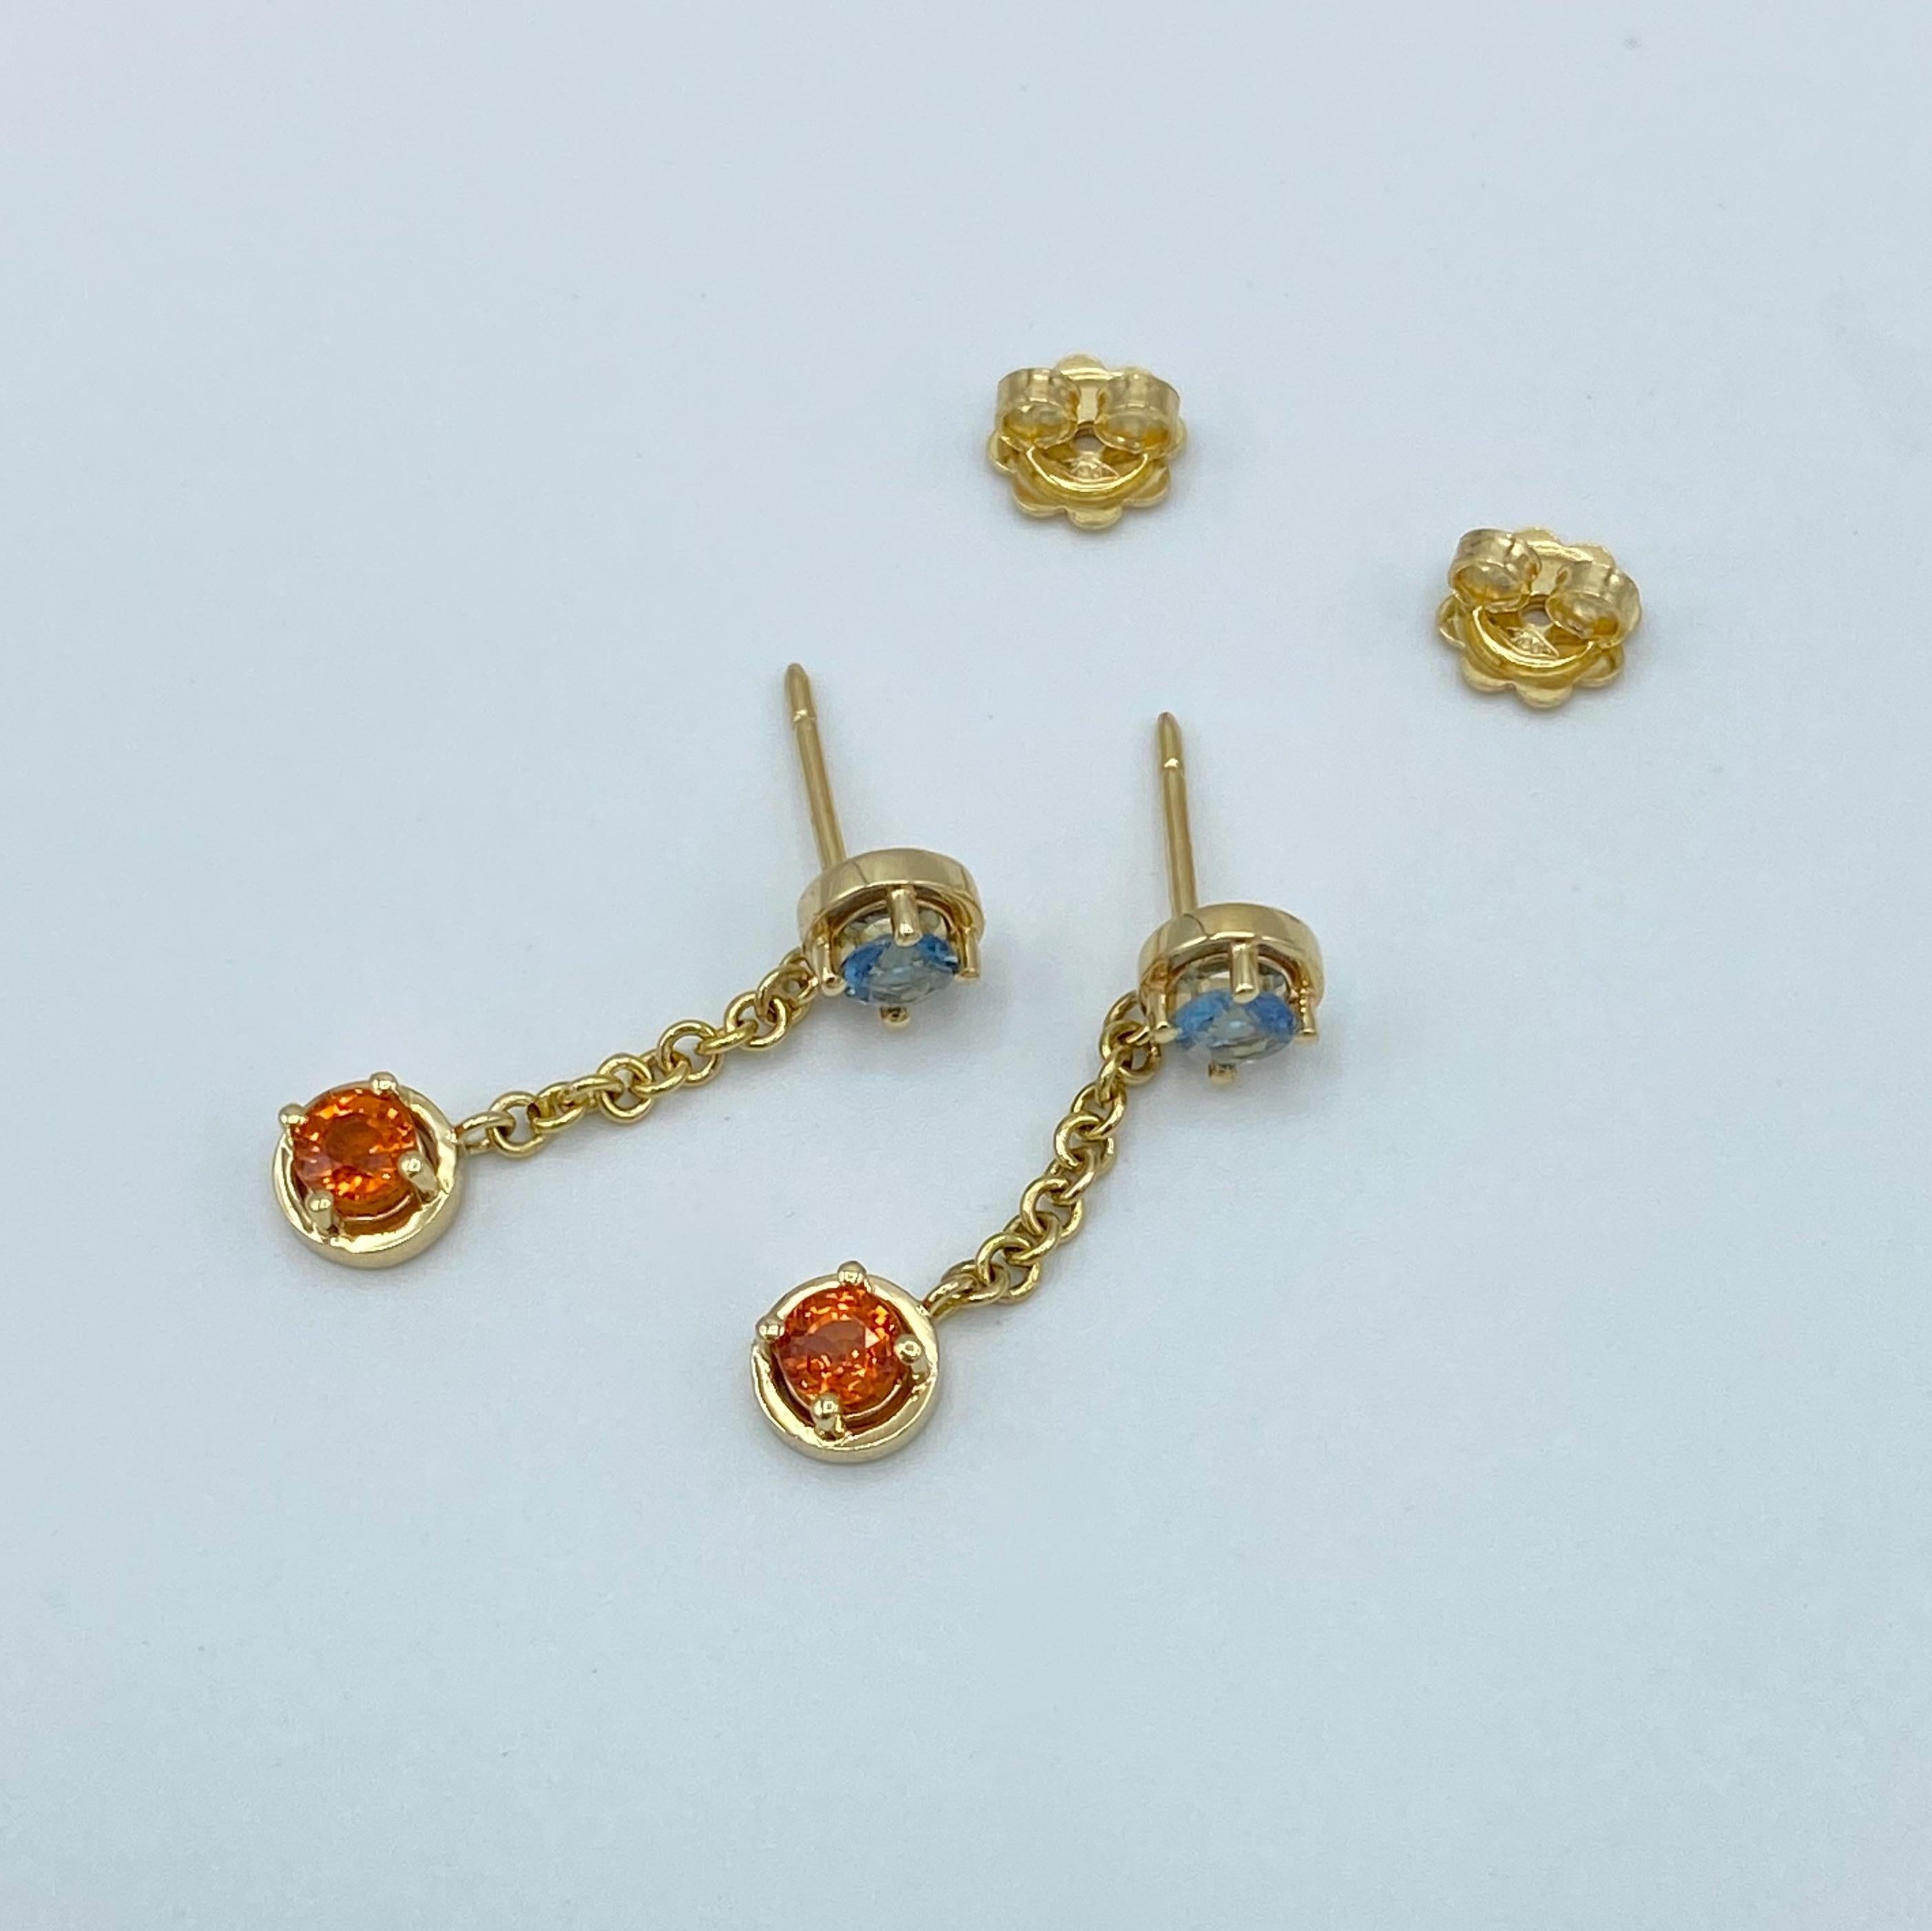 These earrings are one of the first pieces of the new color line.
They can be combined with some rings available in this shop (as you see in one of the images of this item)
They are handmade and the chain that connects the two stones is 1.5 cm long.